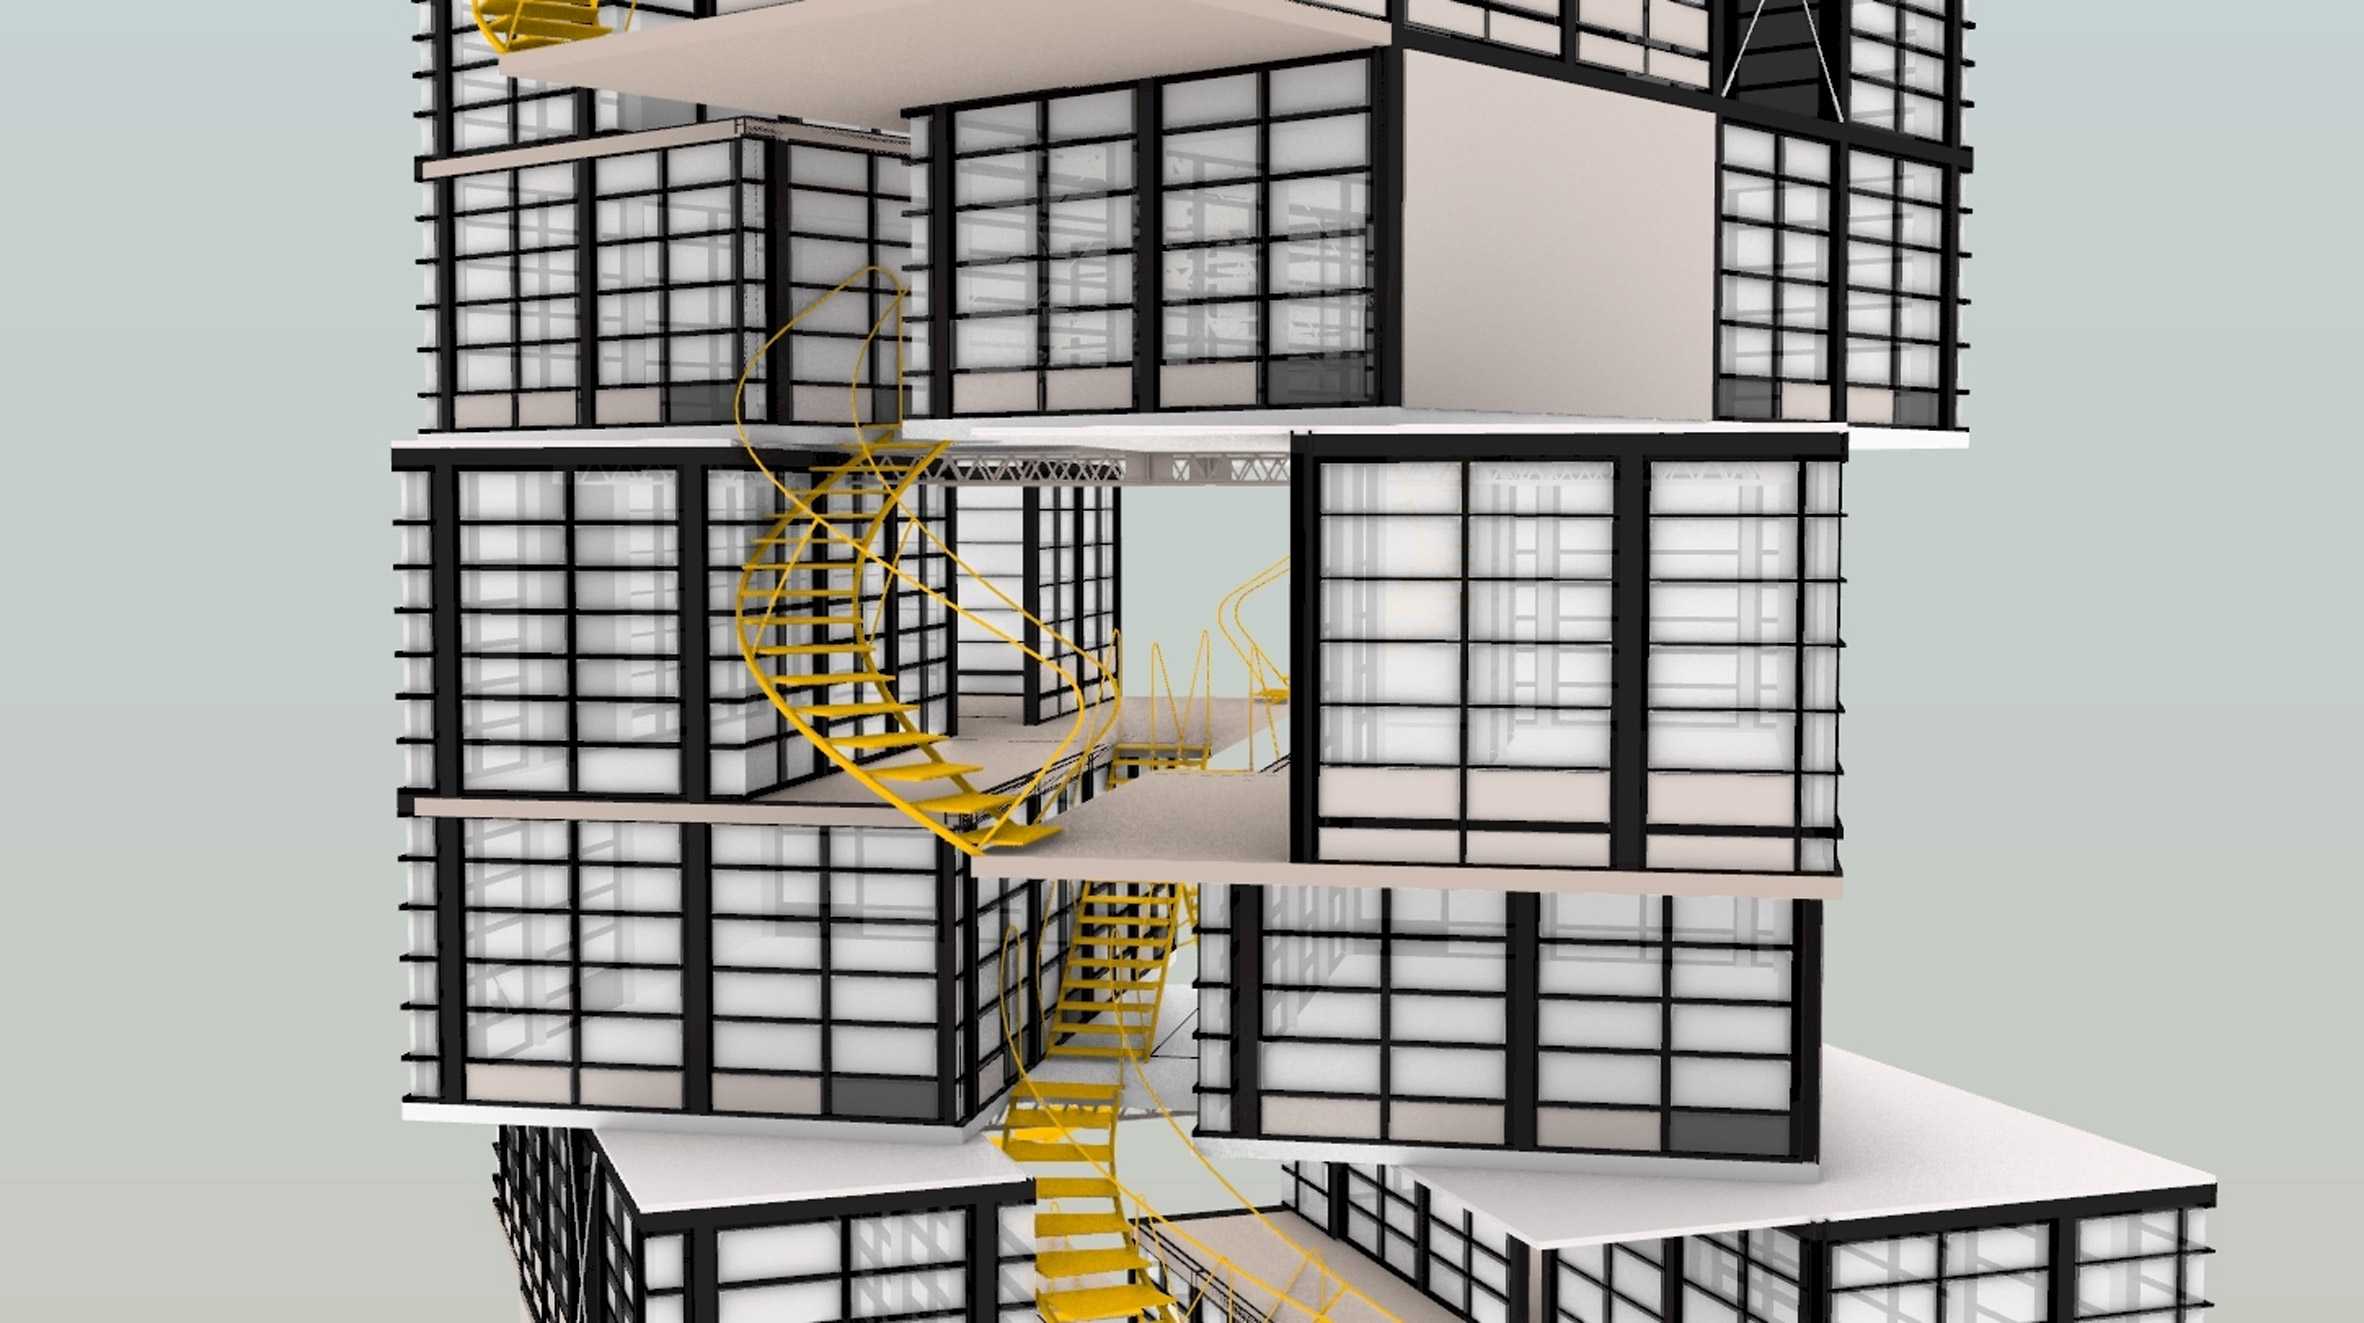 Visualisation showing segment of tall building with exterior yellow staircases